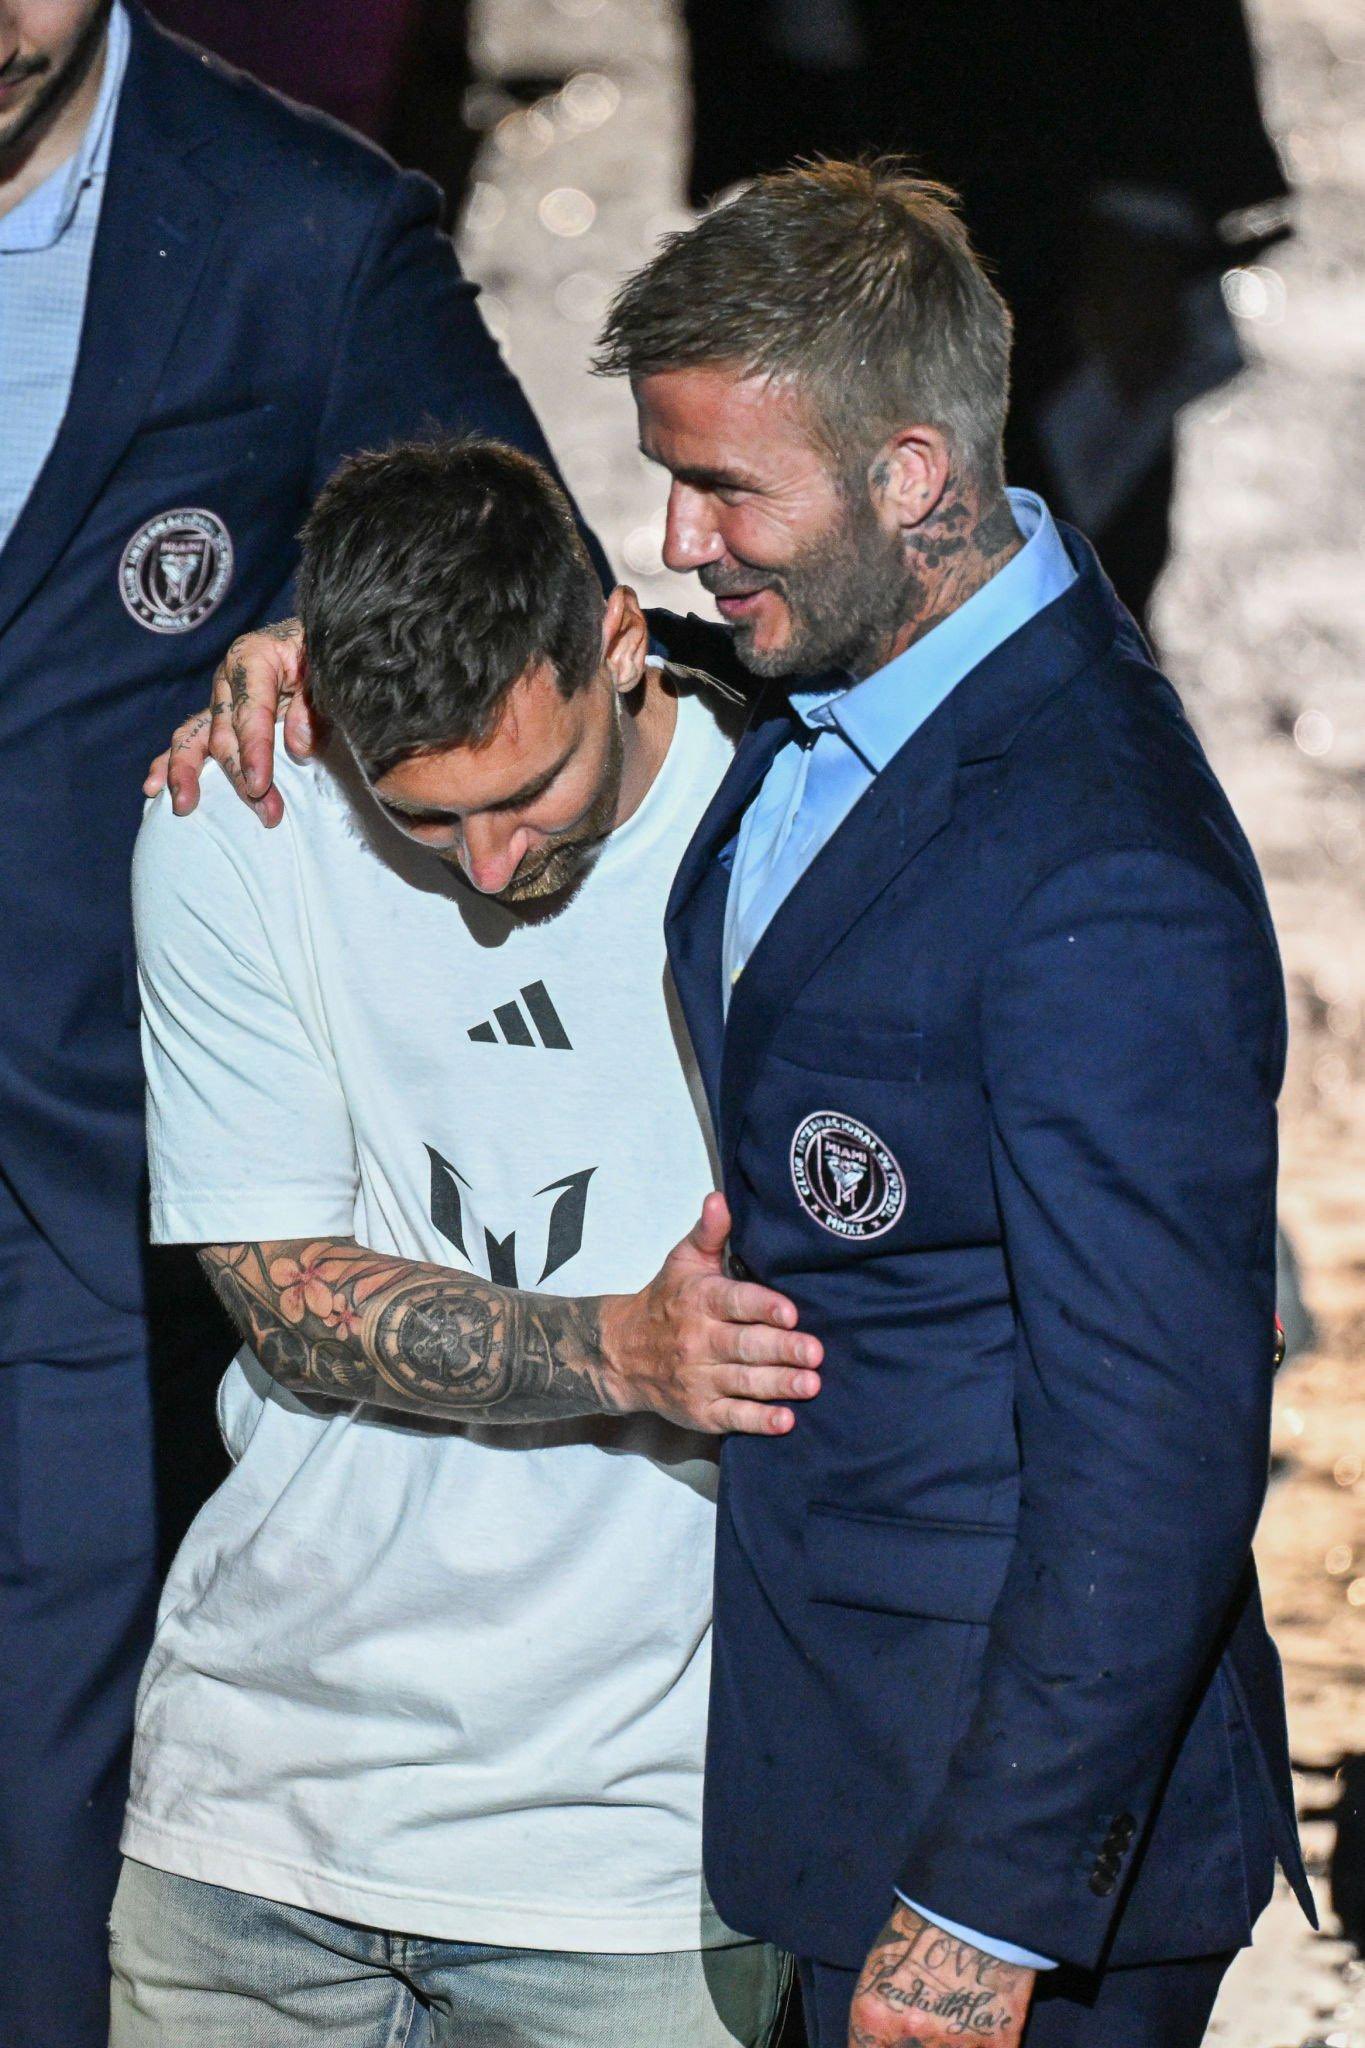 Leo Messi  Fan Club on X: "David Beckham: "Please forgive me for feeling  a little bit emotional tonight. It really is a dream come true to welcome  Lionel Messi to Inter